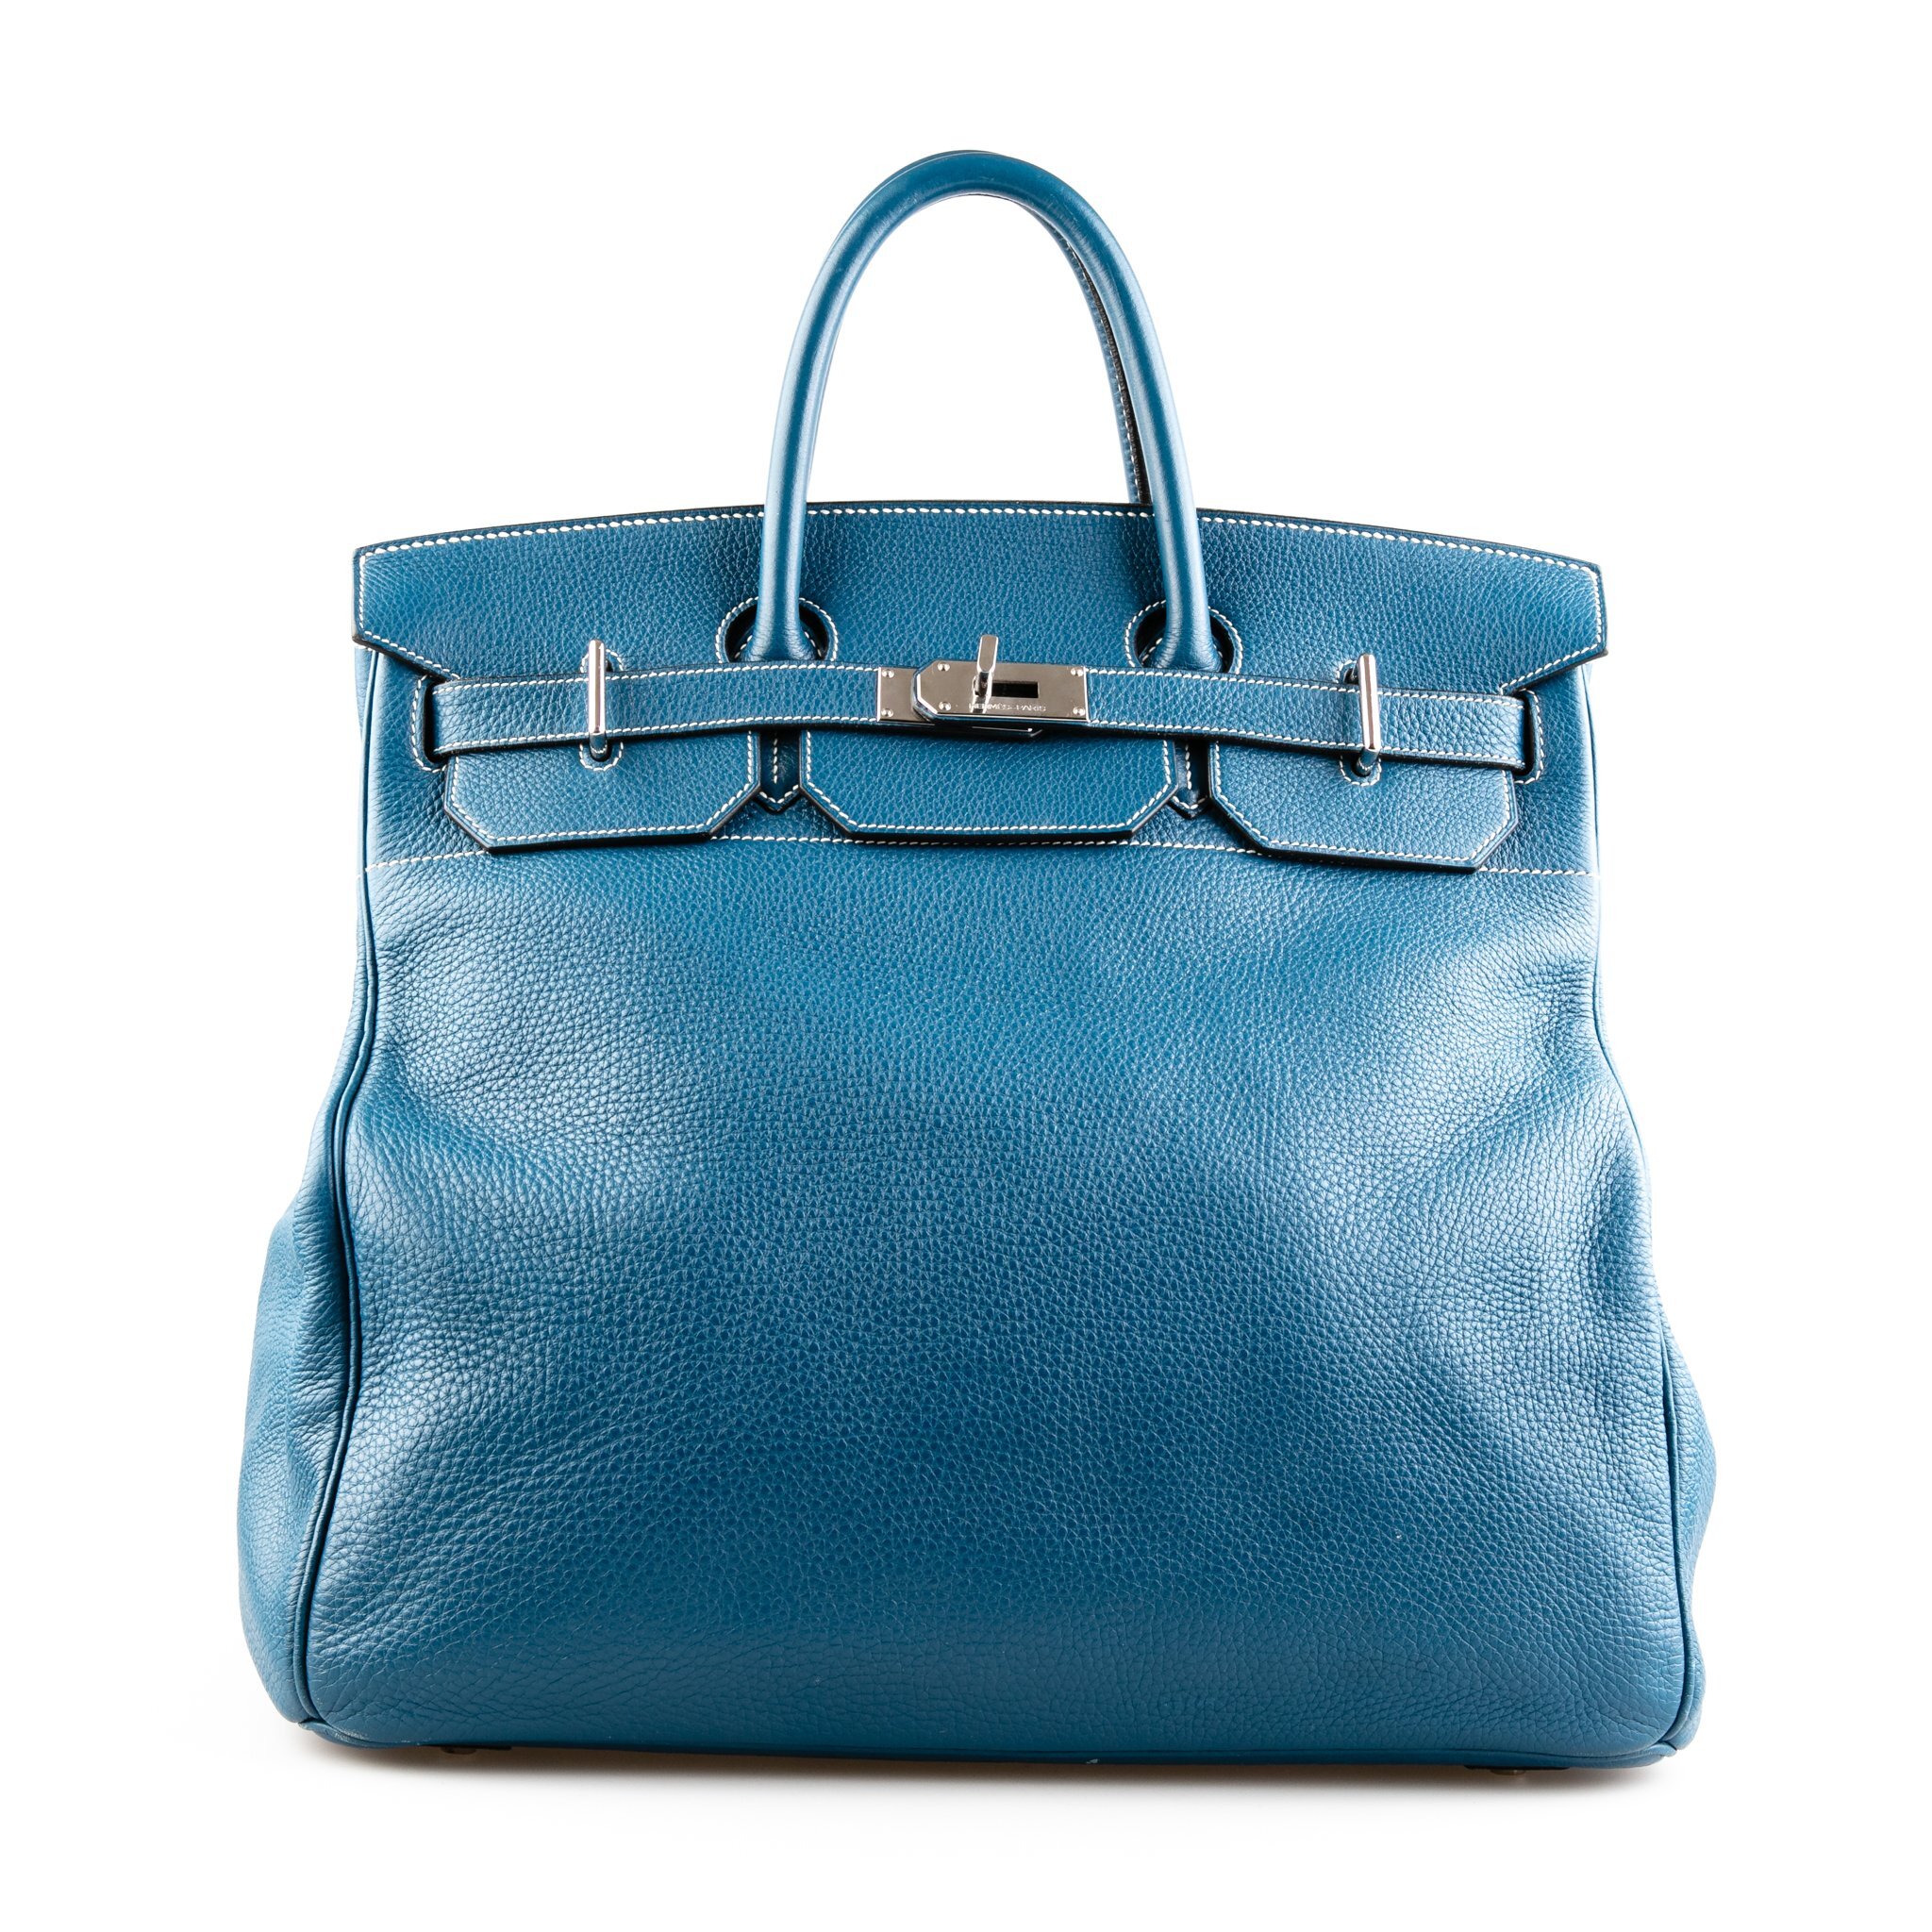 How Much is the Hermes HAC 50cm Birkin 